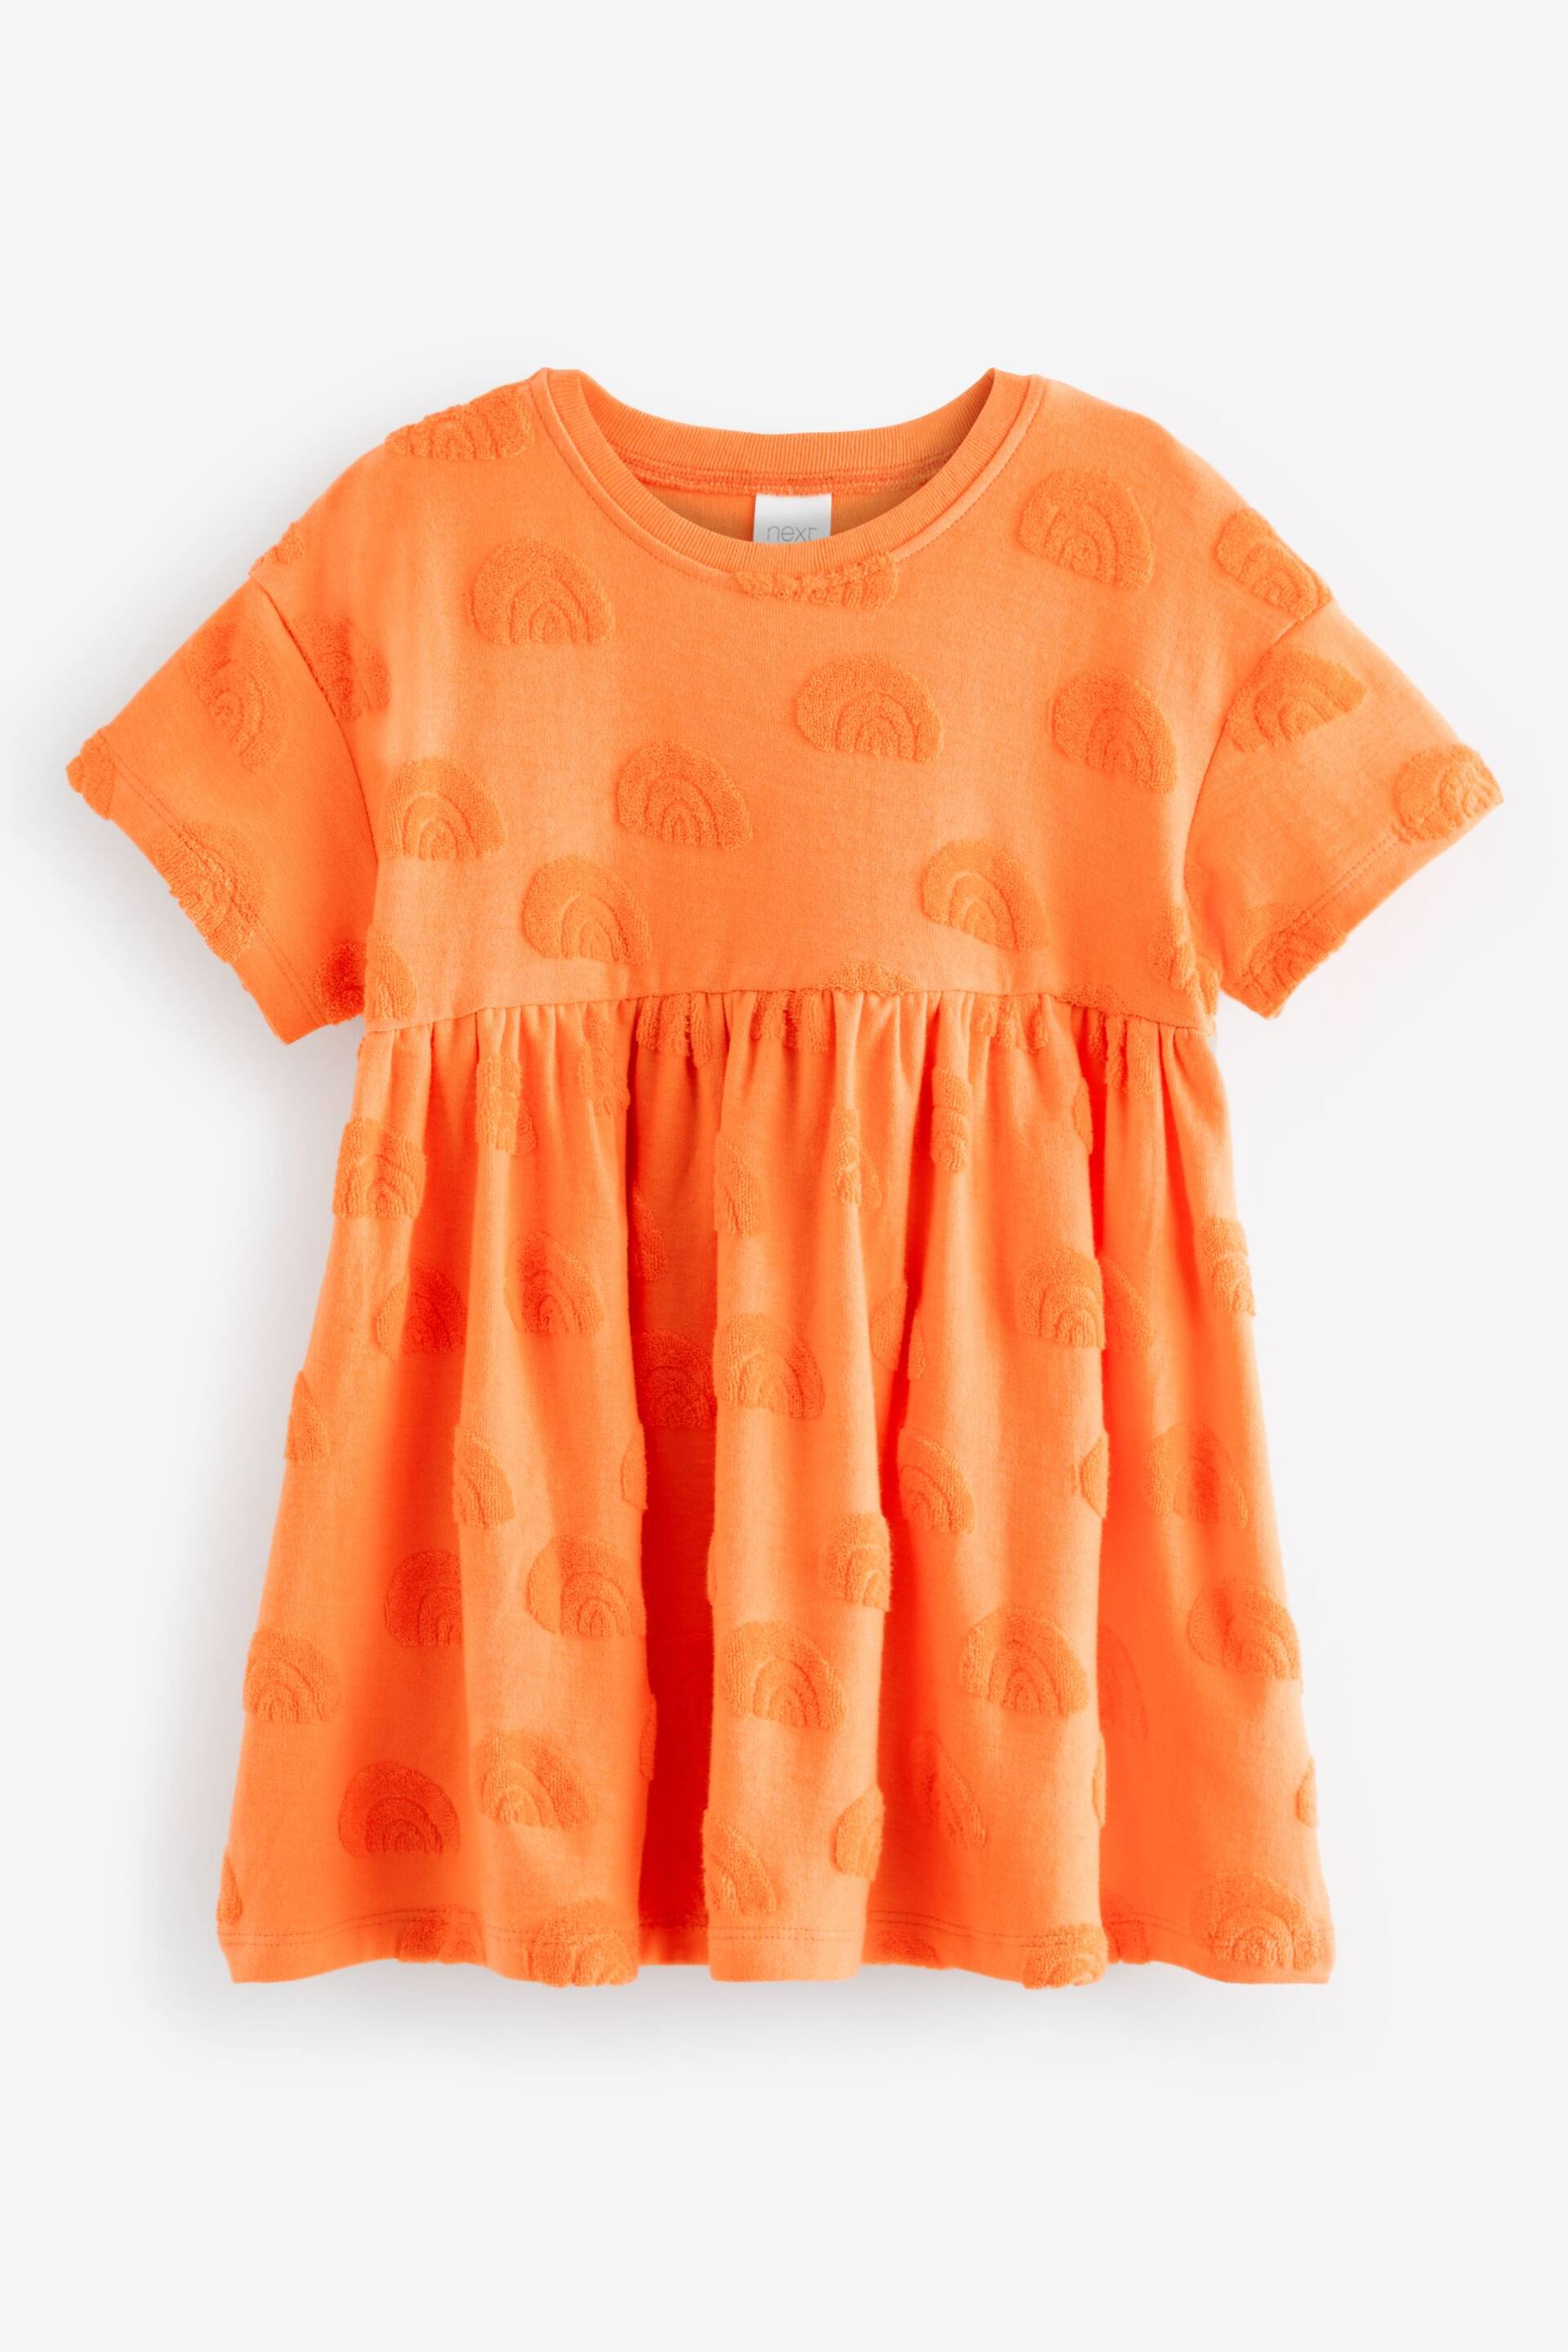 Orange Textured Towelling Dress (3mths-7yrs) - Image 5 of 7